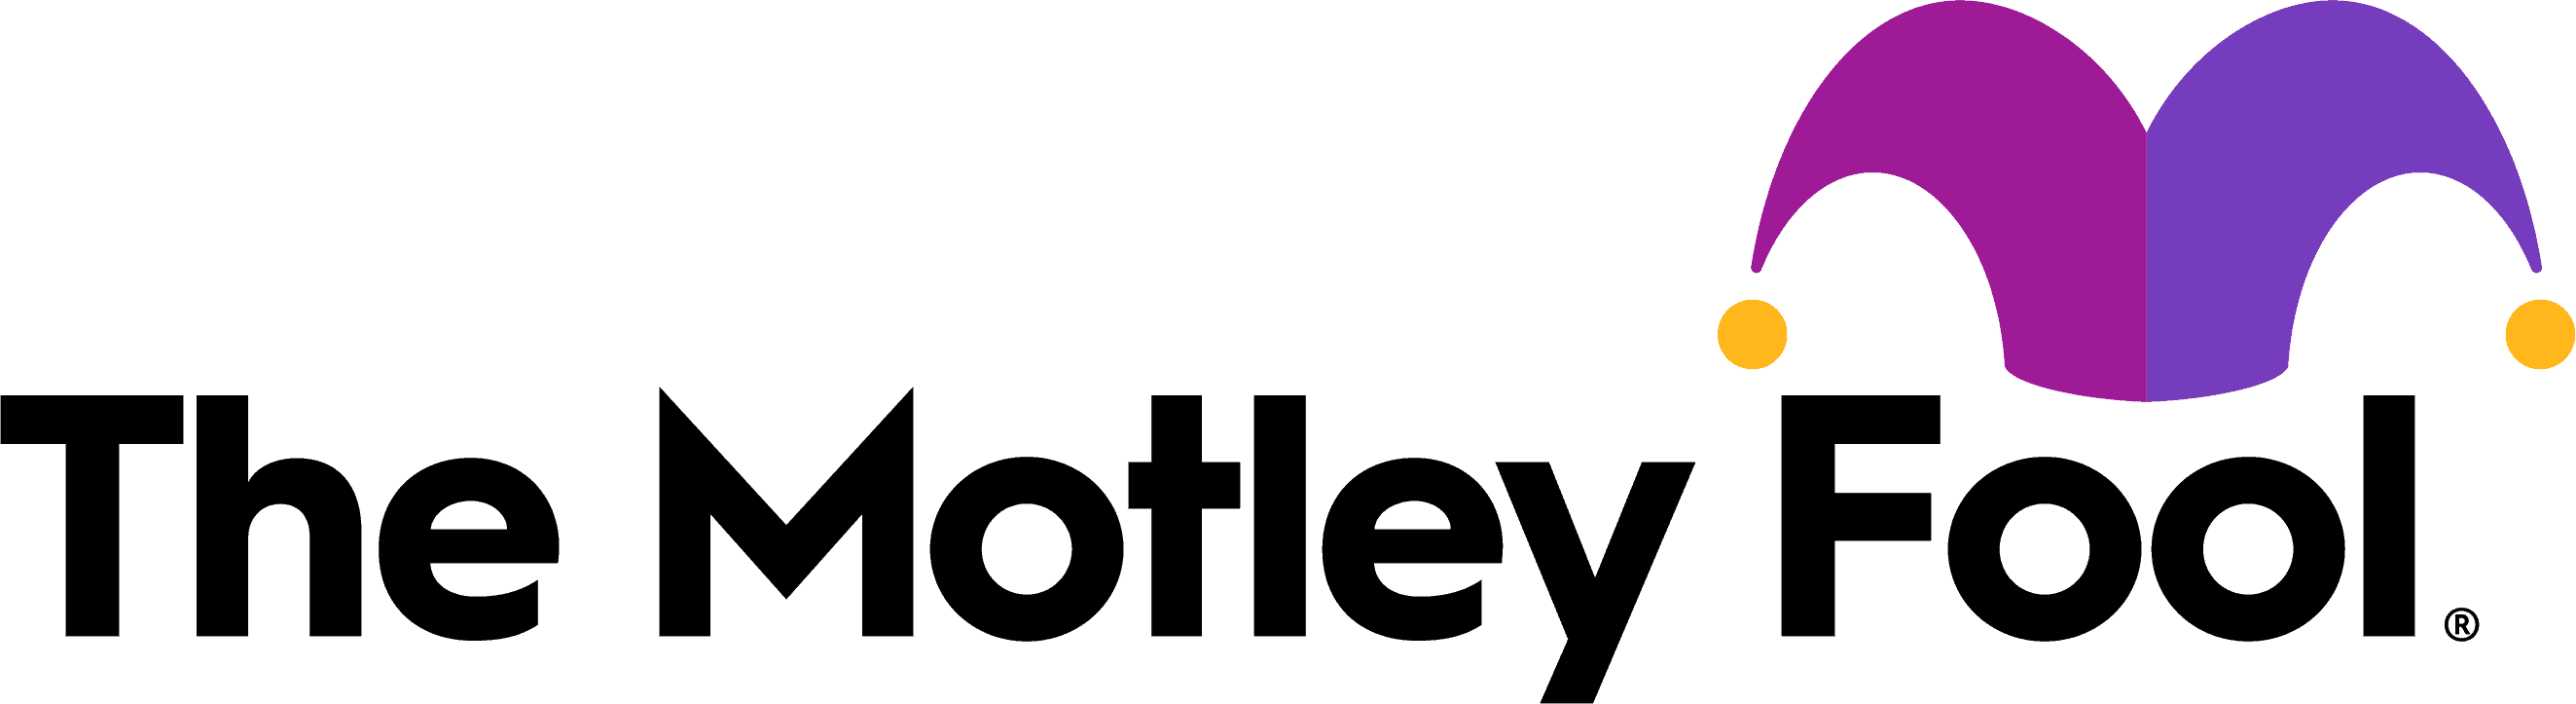 Motley Fool purple, magenta, and gold logo with jester hat